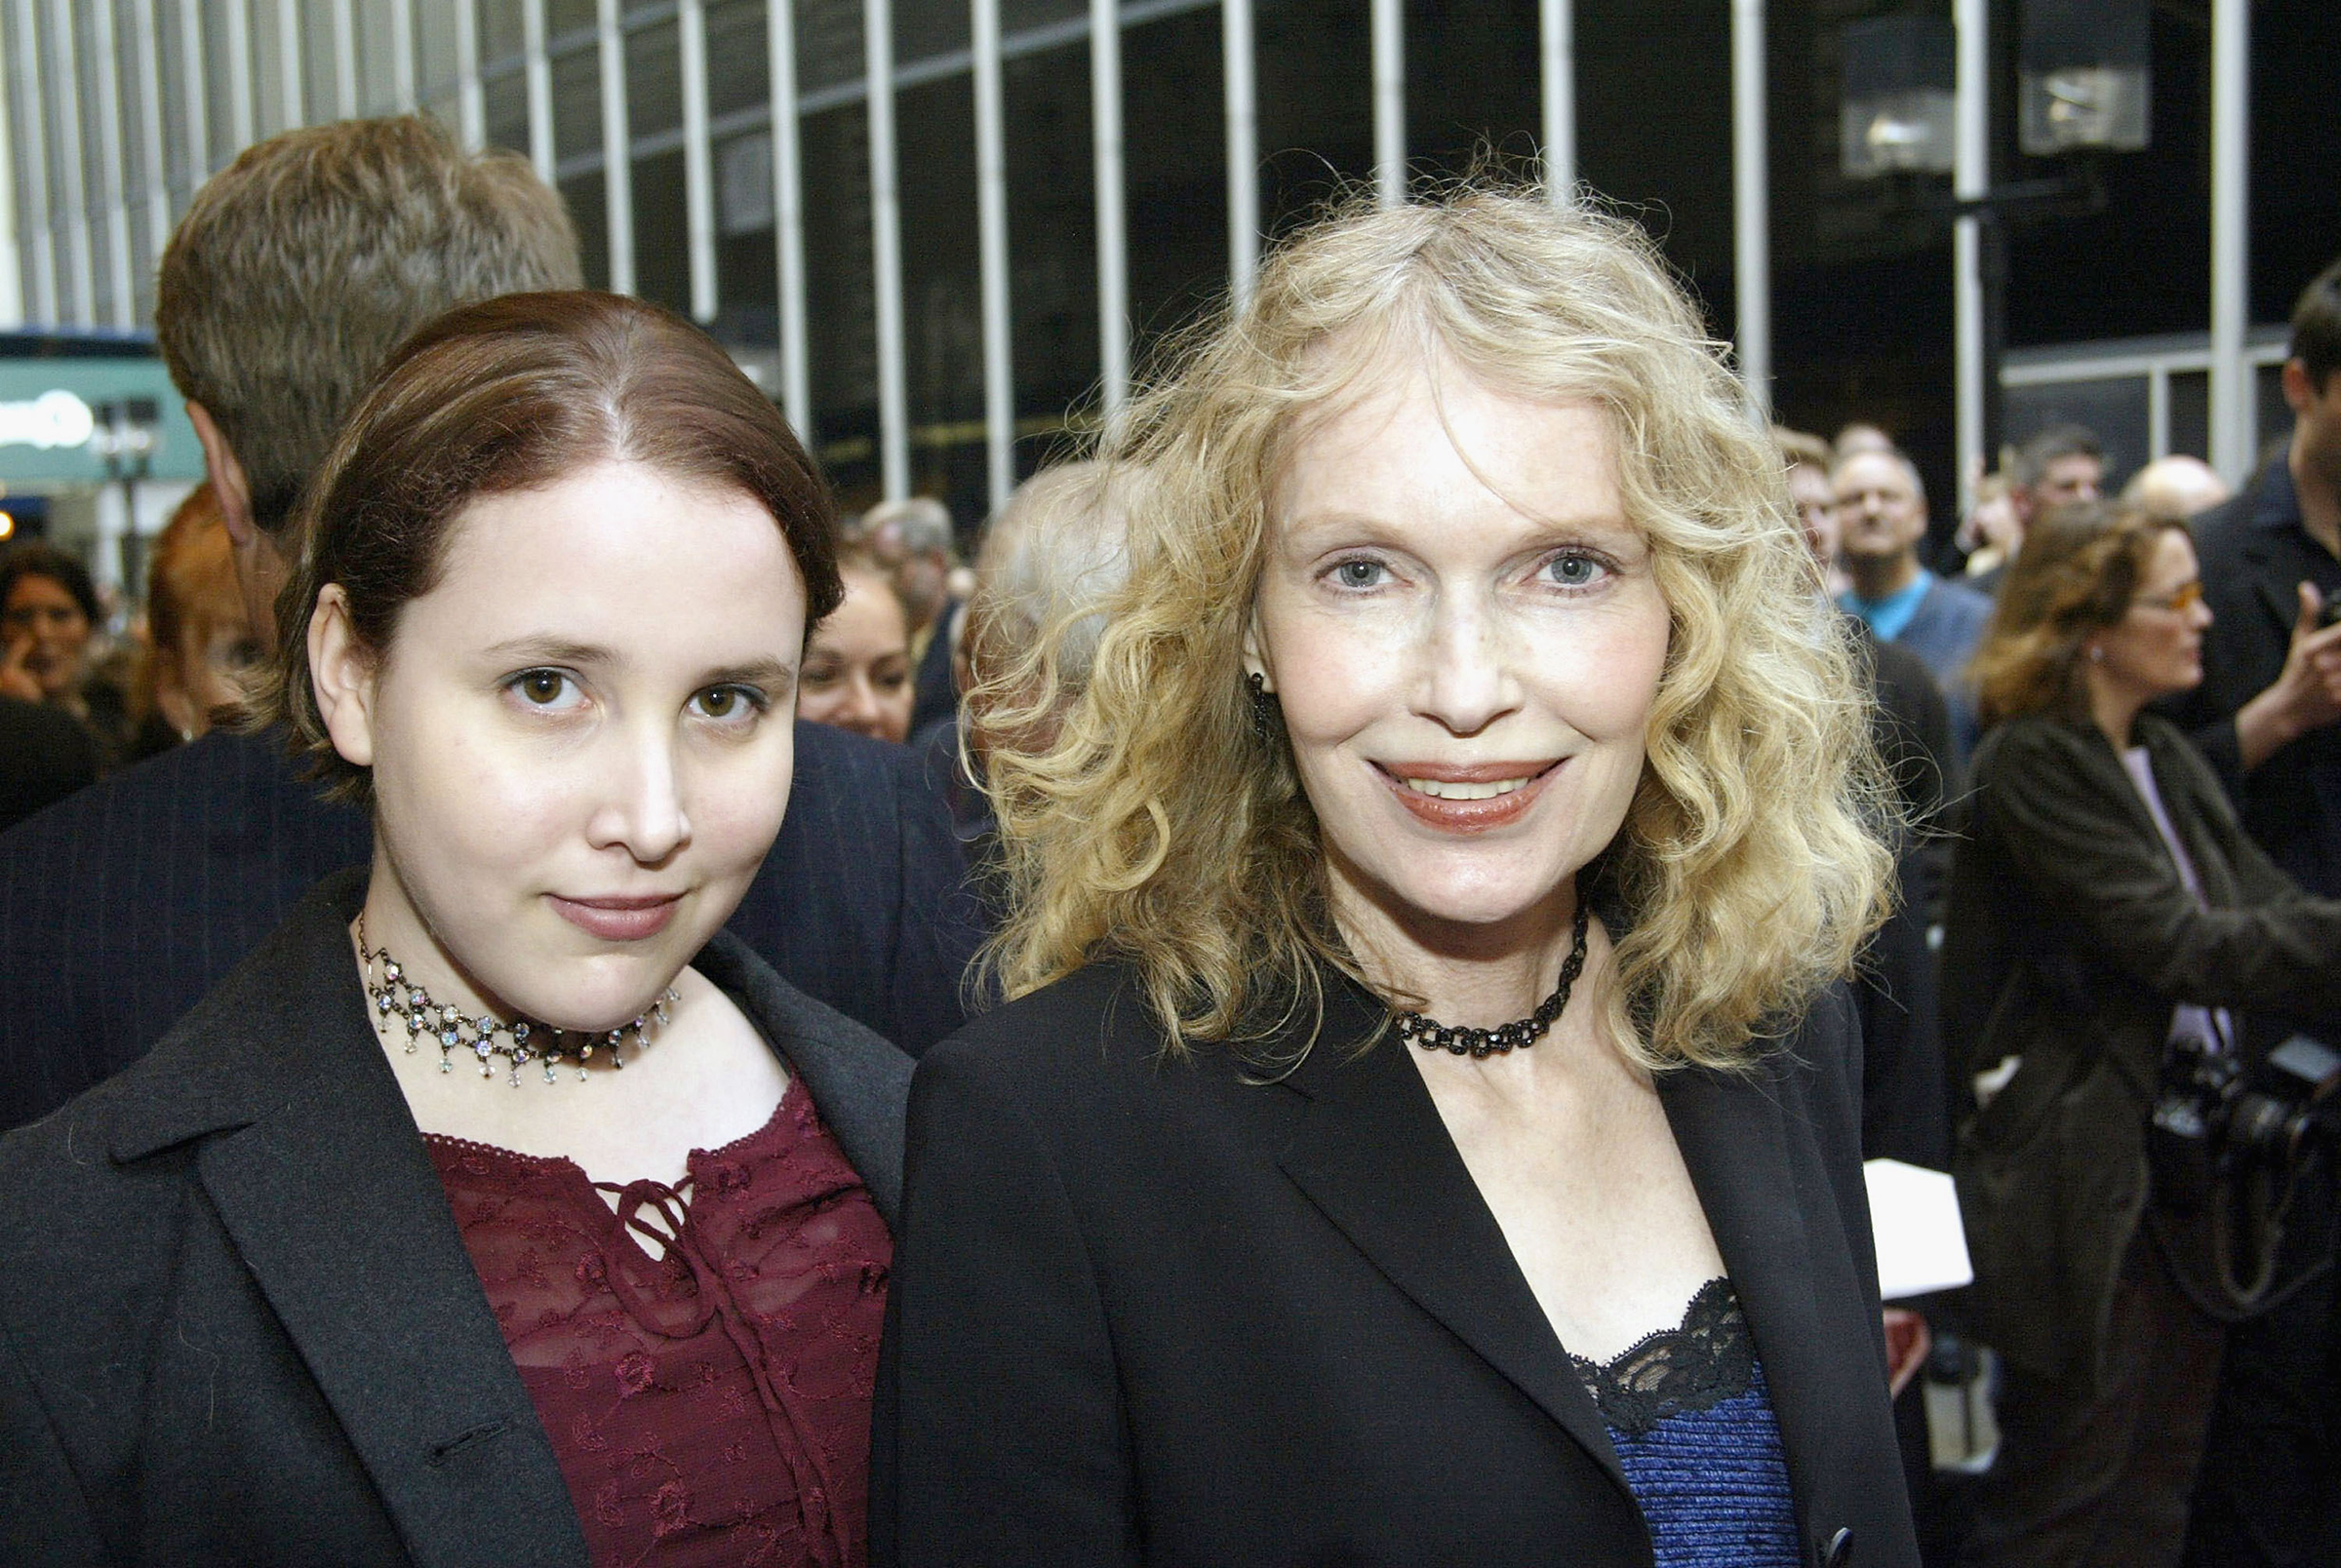 Dylan Farrow, left, and her mother Mia Farrow arrive at the Opening Night of "Gypsy" at The Shubert Theatre in New York City on May 1, 2003 (Bruce Glikas—Getty Images)